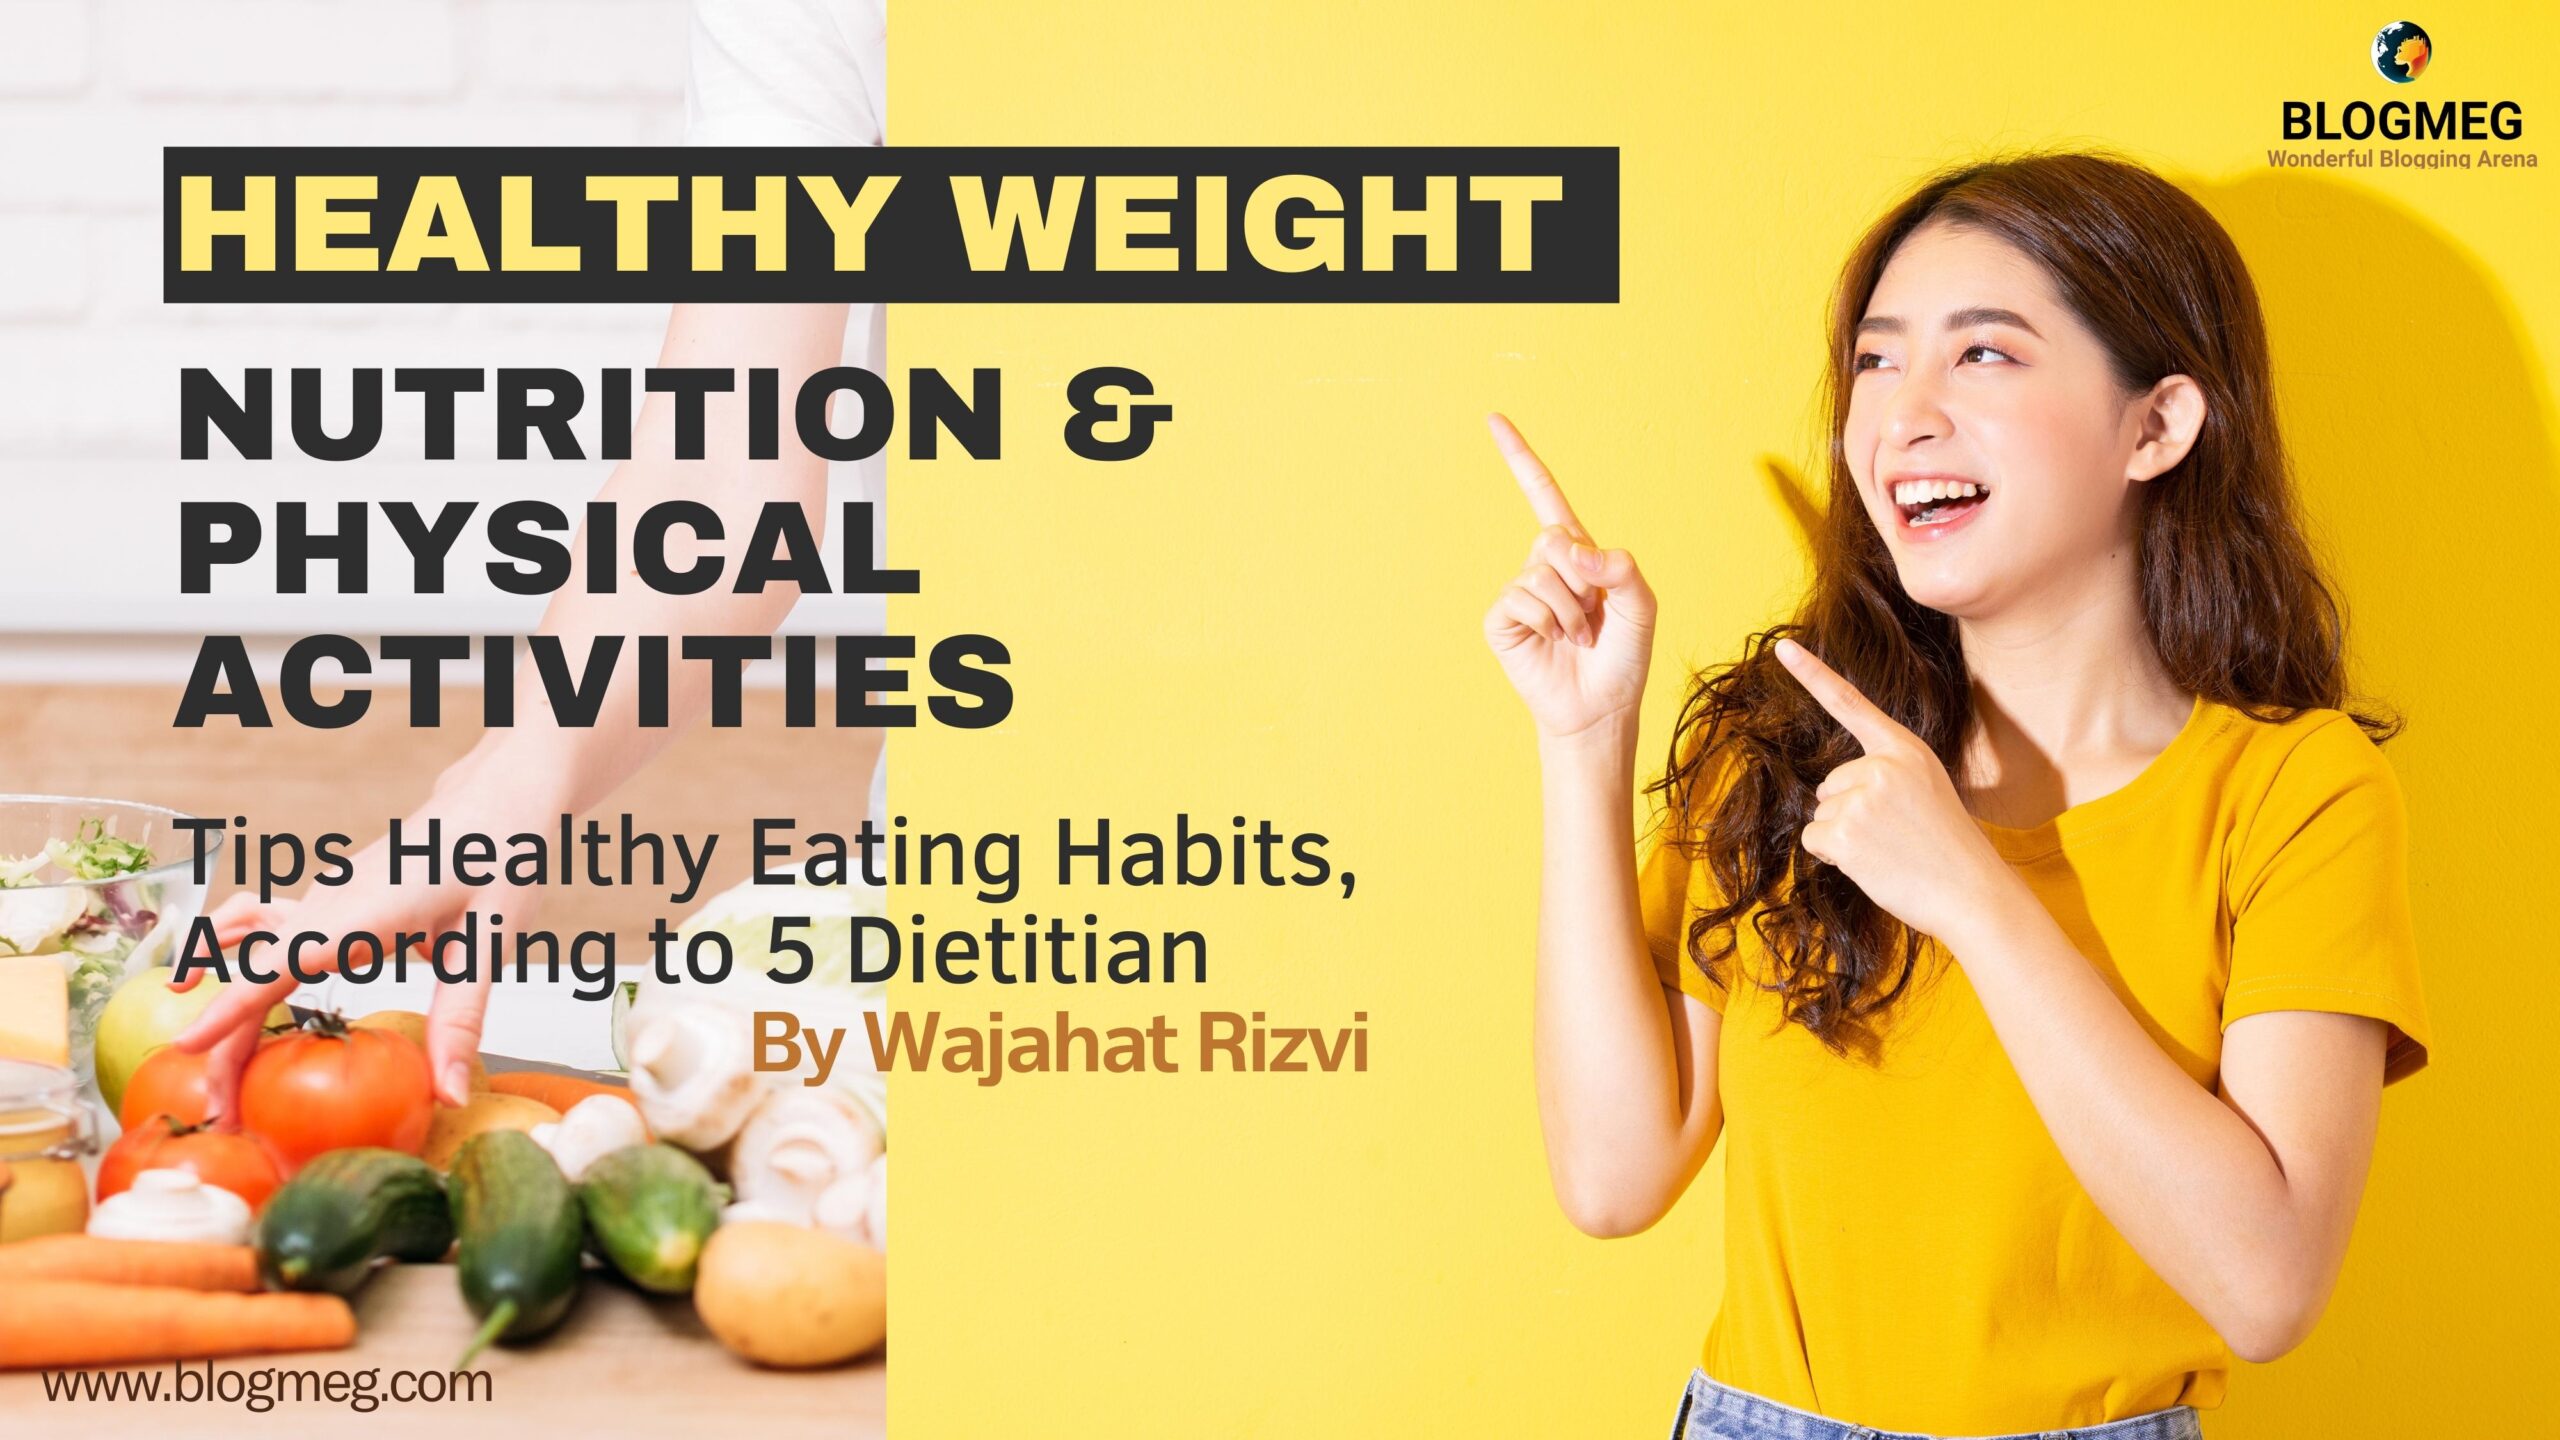 Healthy Weight, Nutrition, and Physical Activity